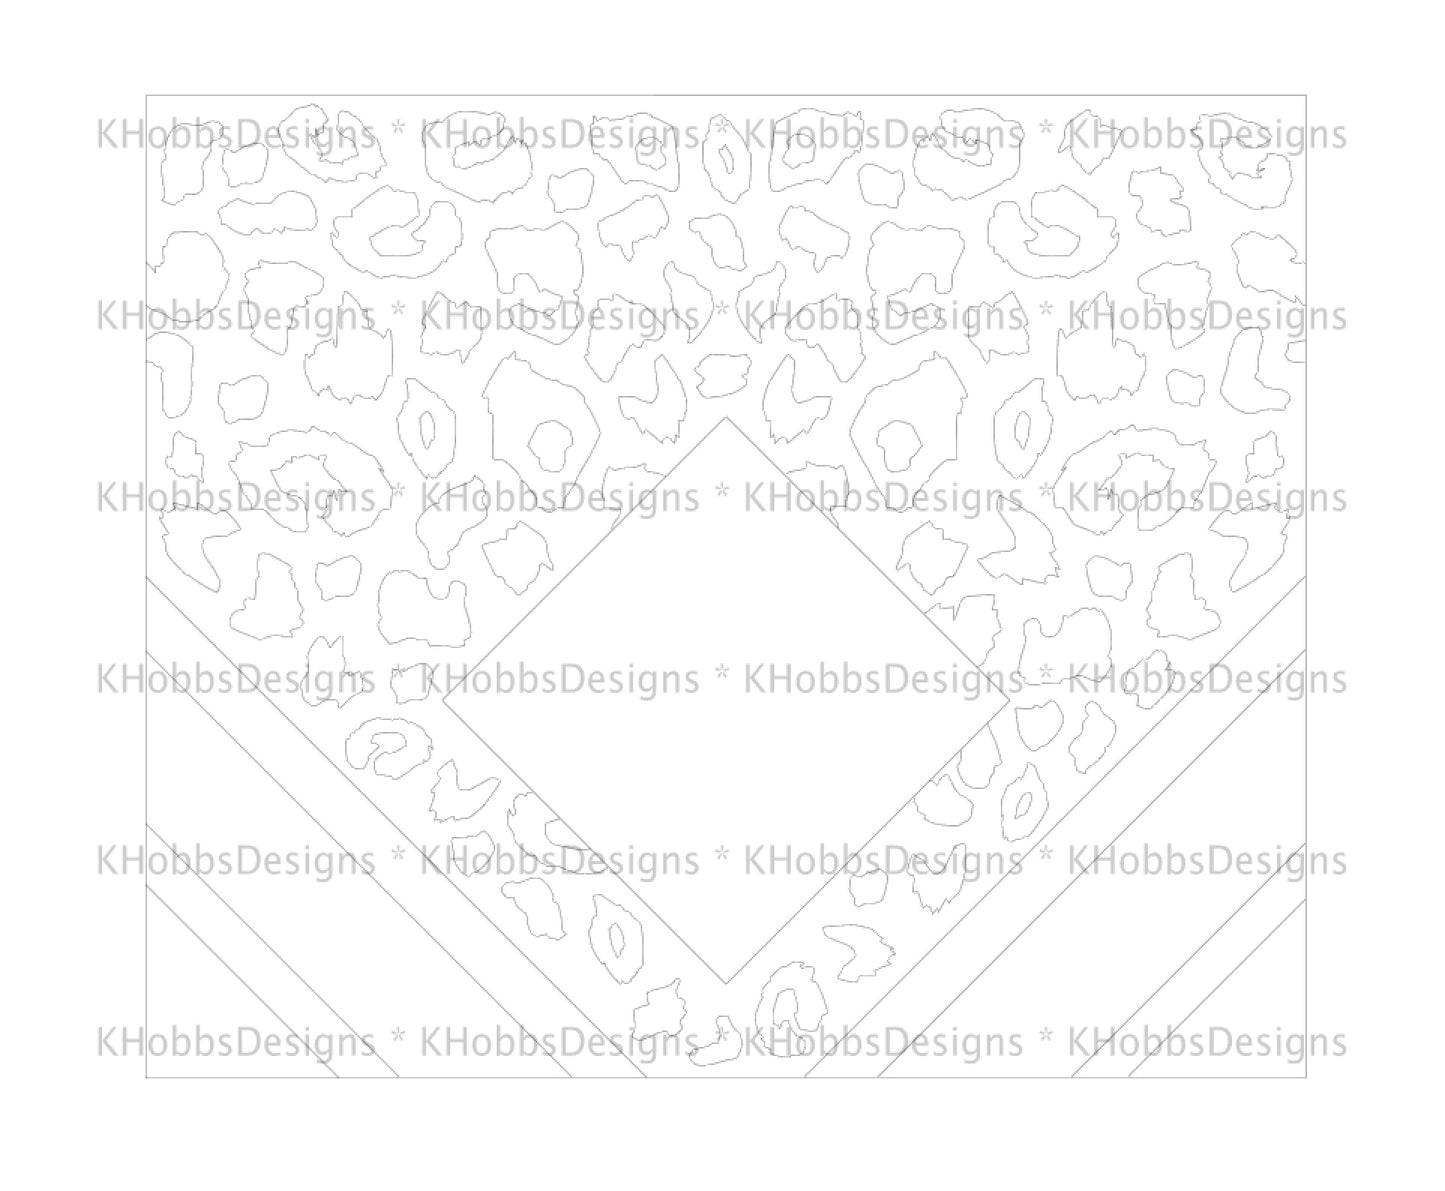 Leopard Striped Template for Craft Haven 20oz Skinny Straight - Digital Cut File Only